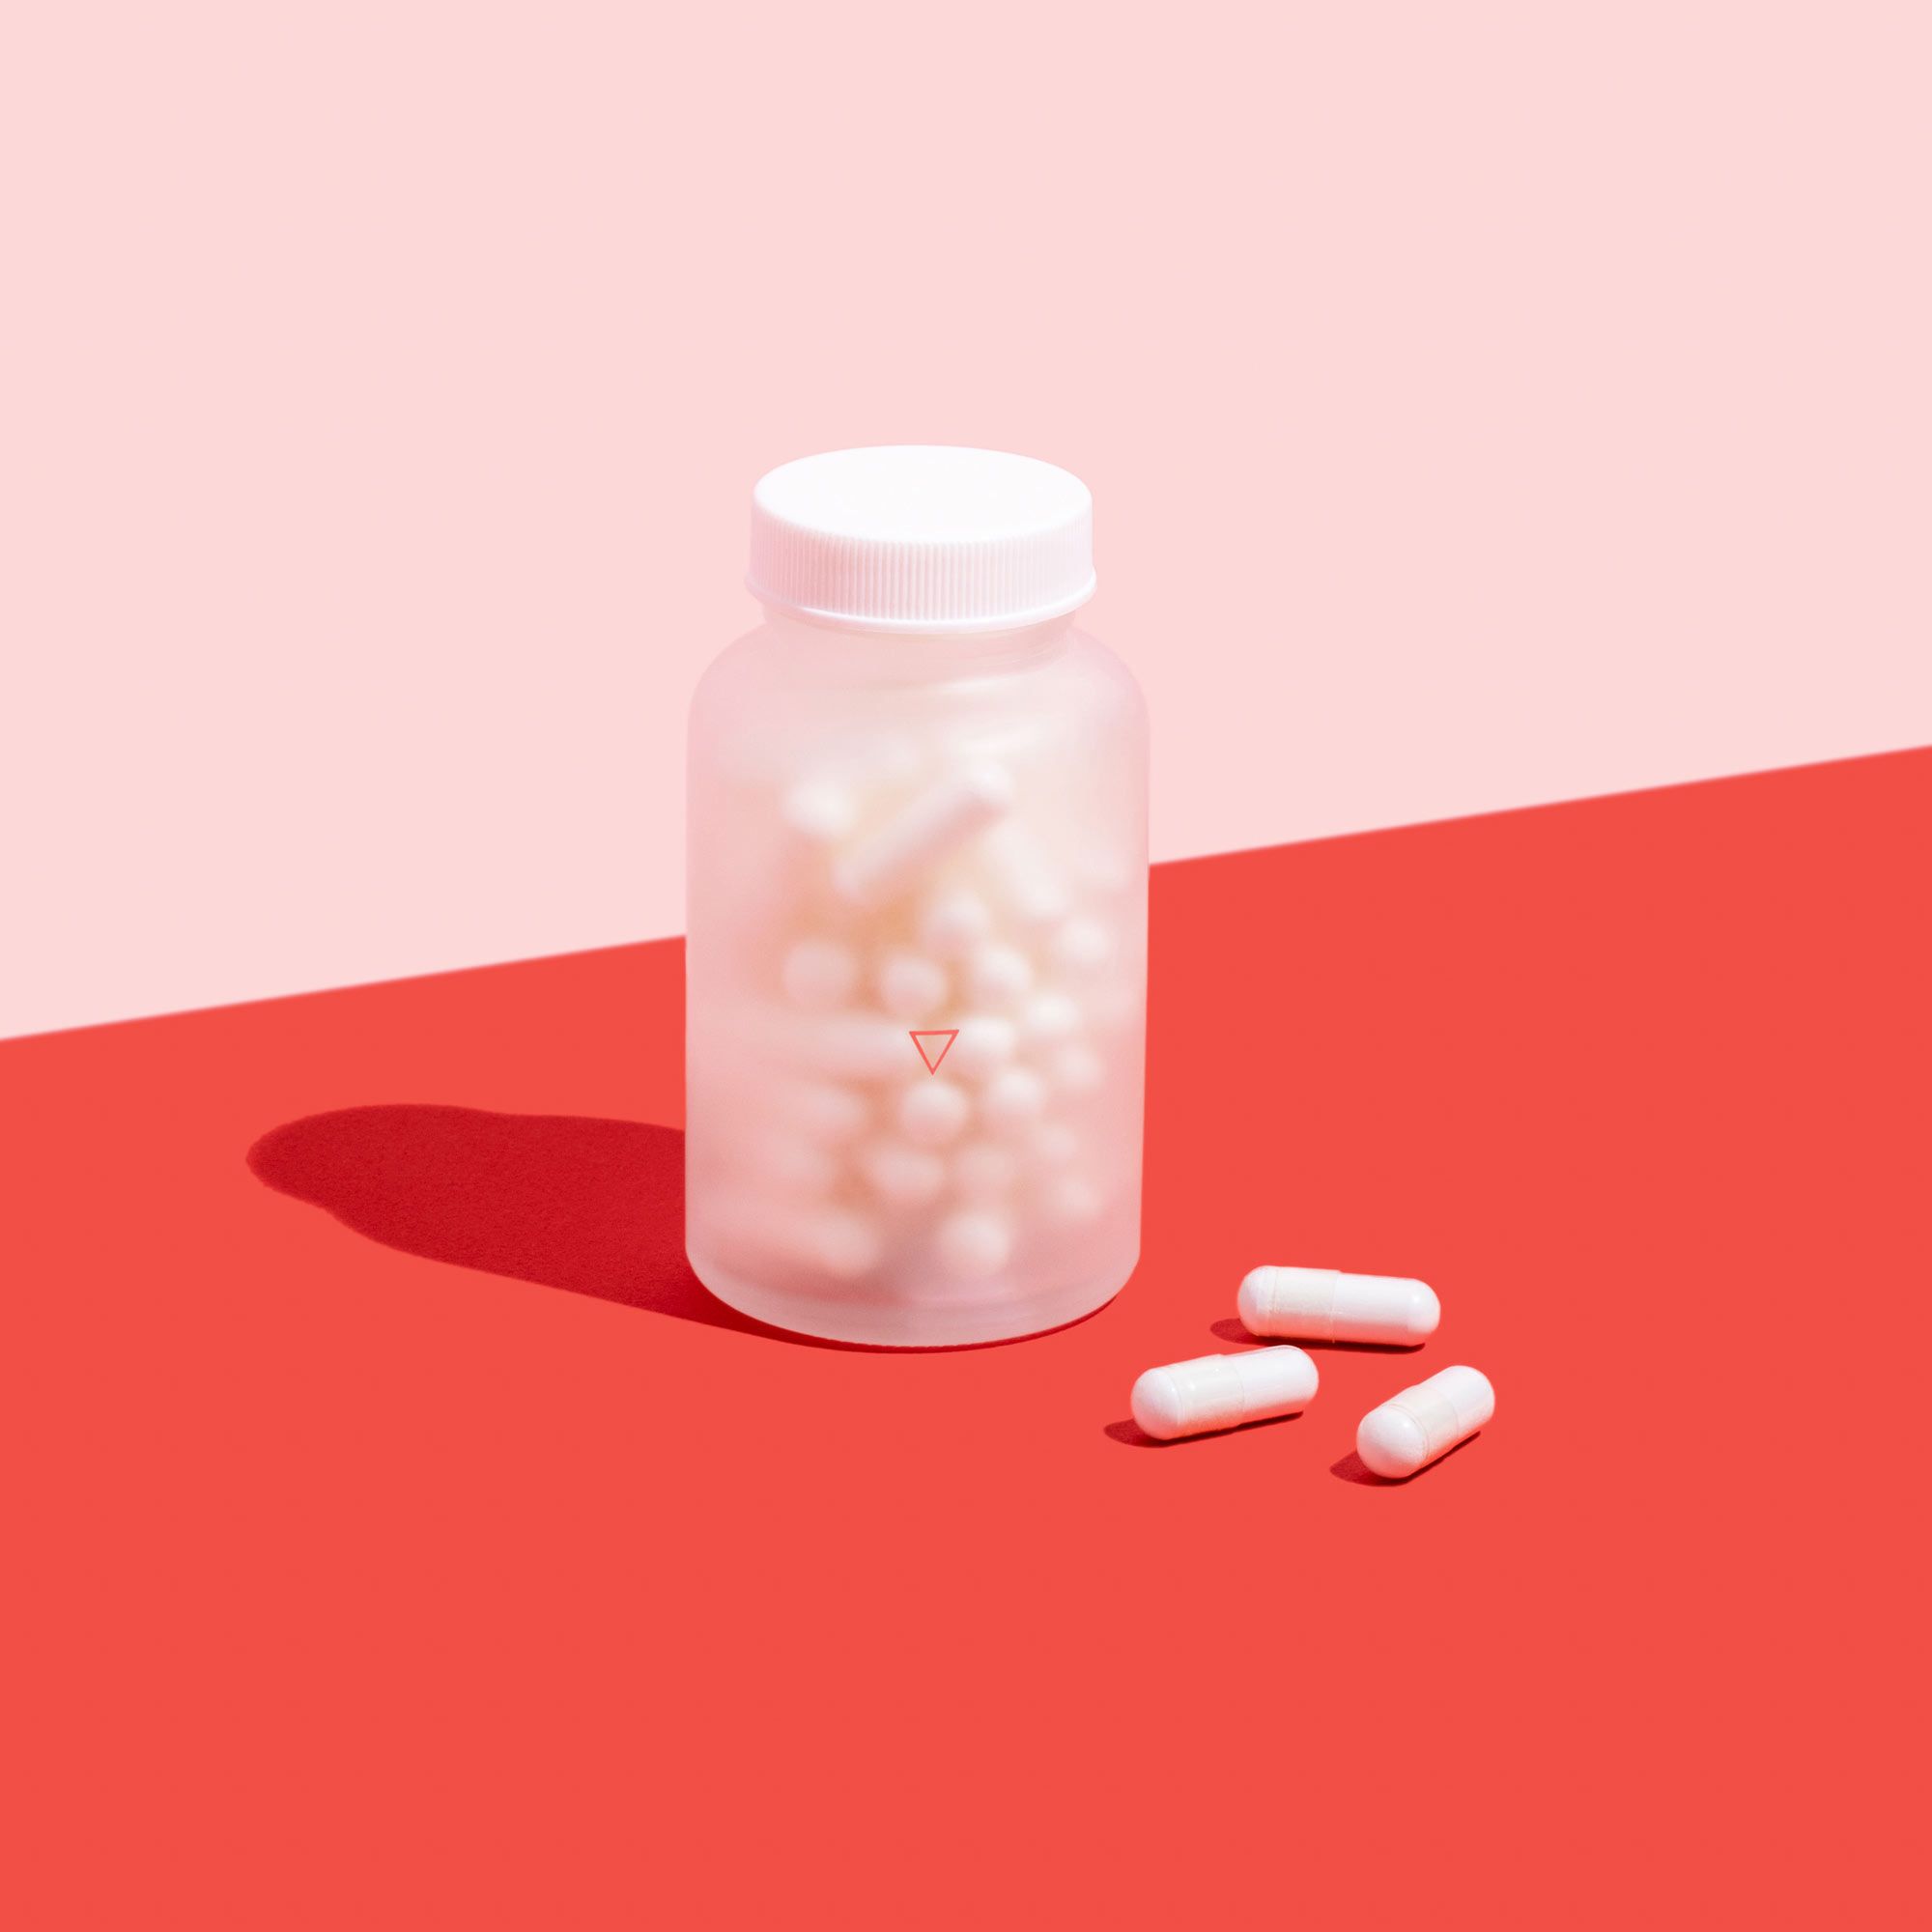 Jar of Lysine capsules to treat oral and genital herpes on a pink background and red surface